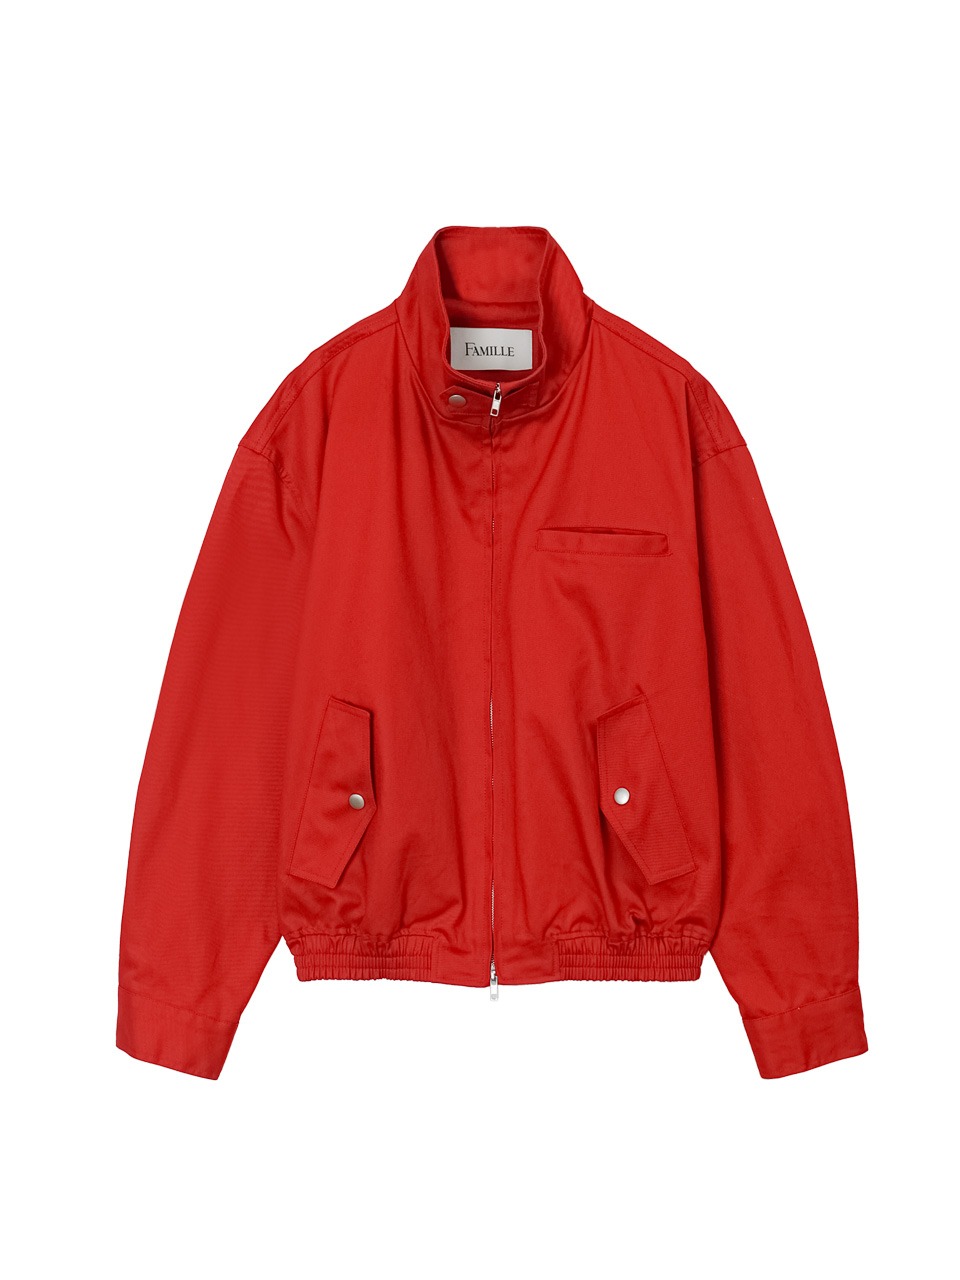 FAMILLE - TWO WAY ZIP UP HARRINGTON JACKET (RED)